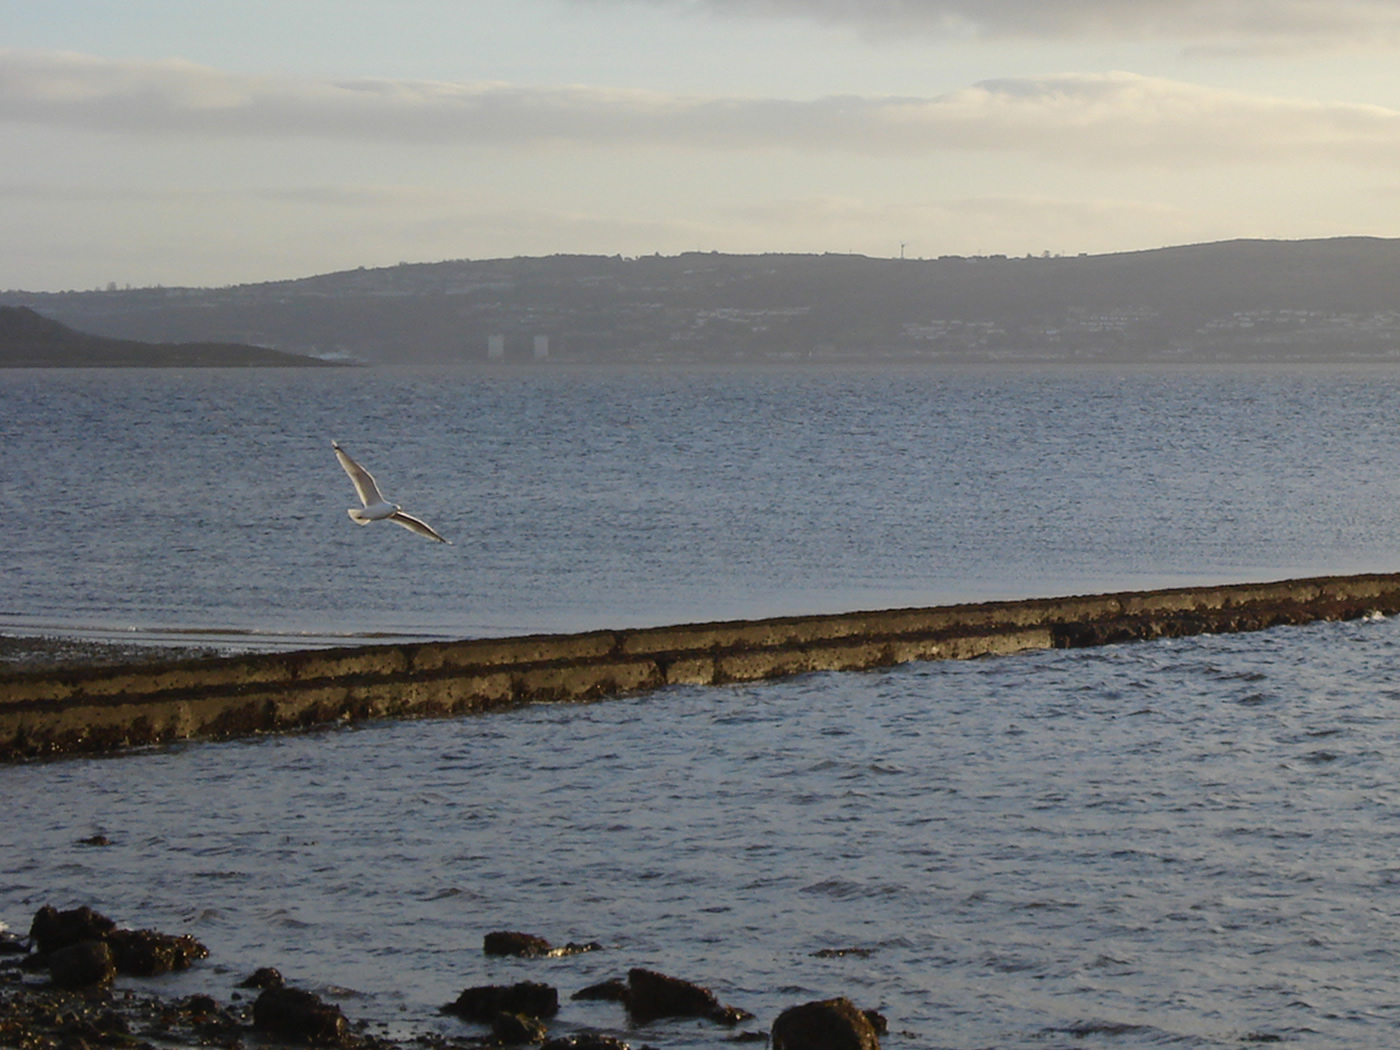 A seagull gliding above the riverbank at the east bay, Helensburgh